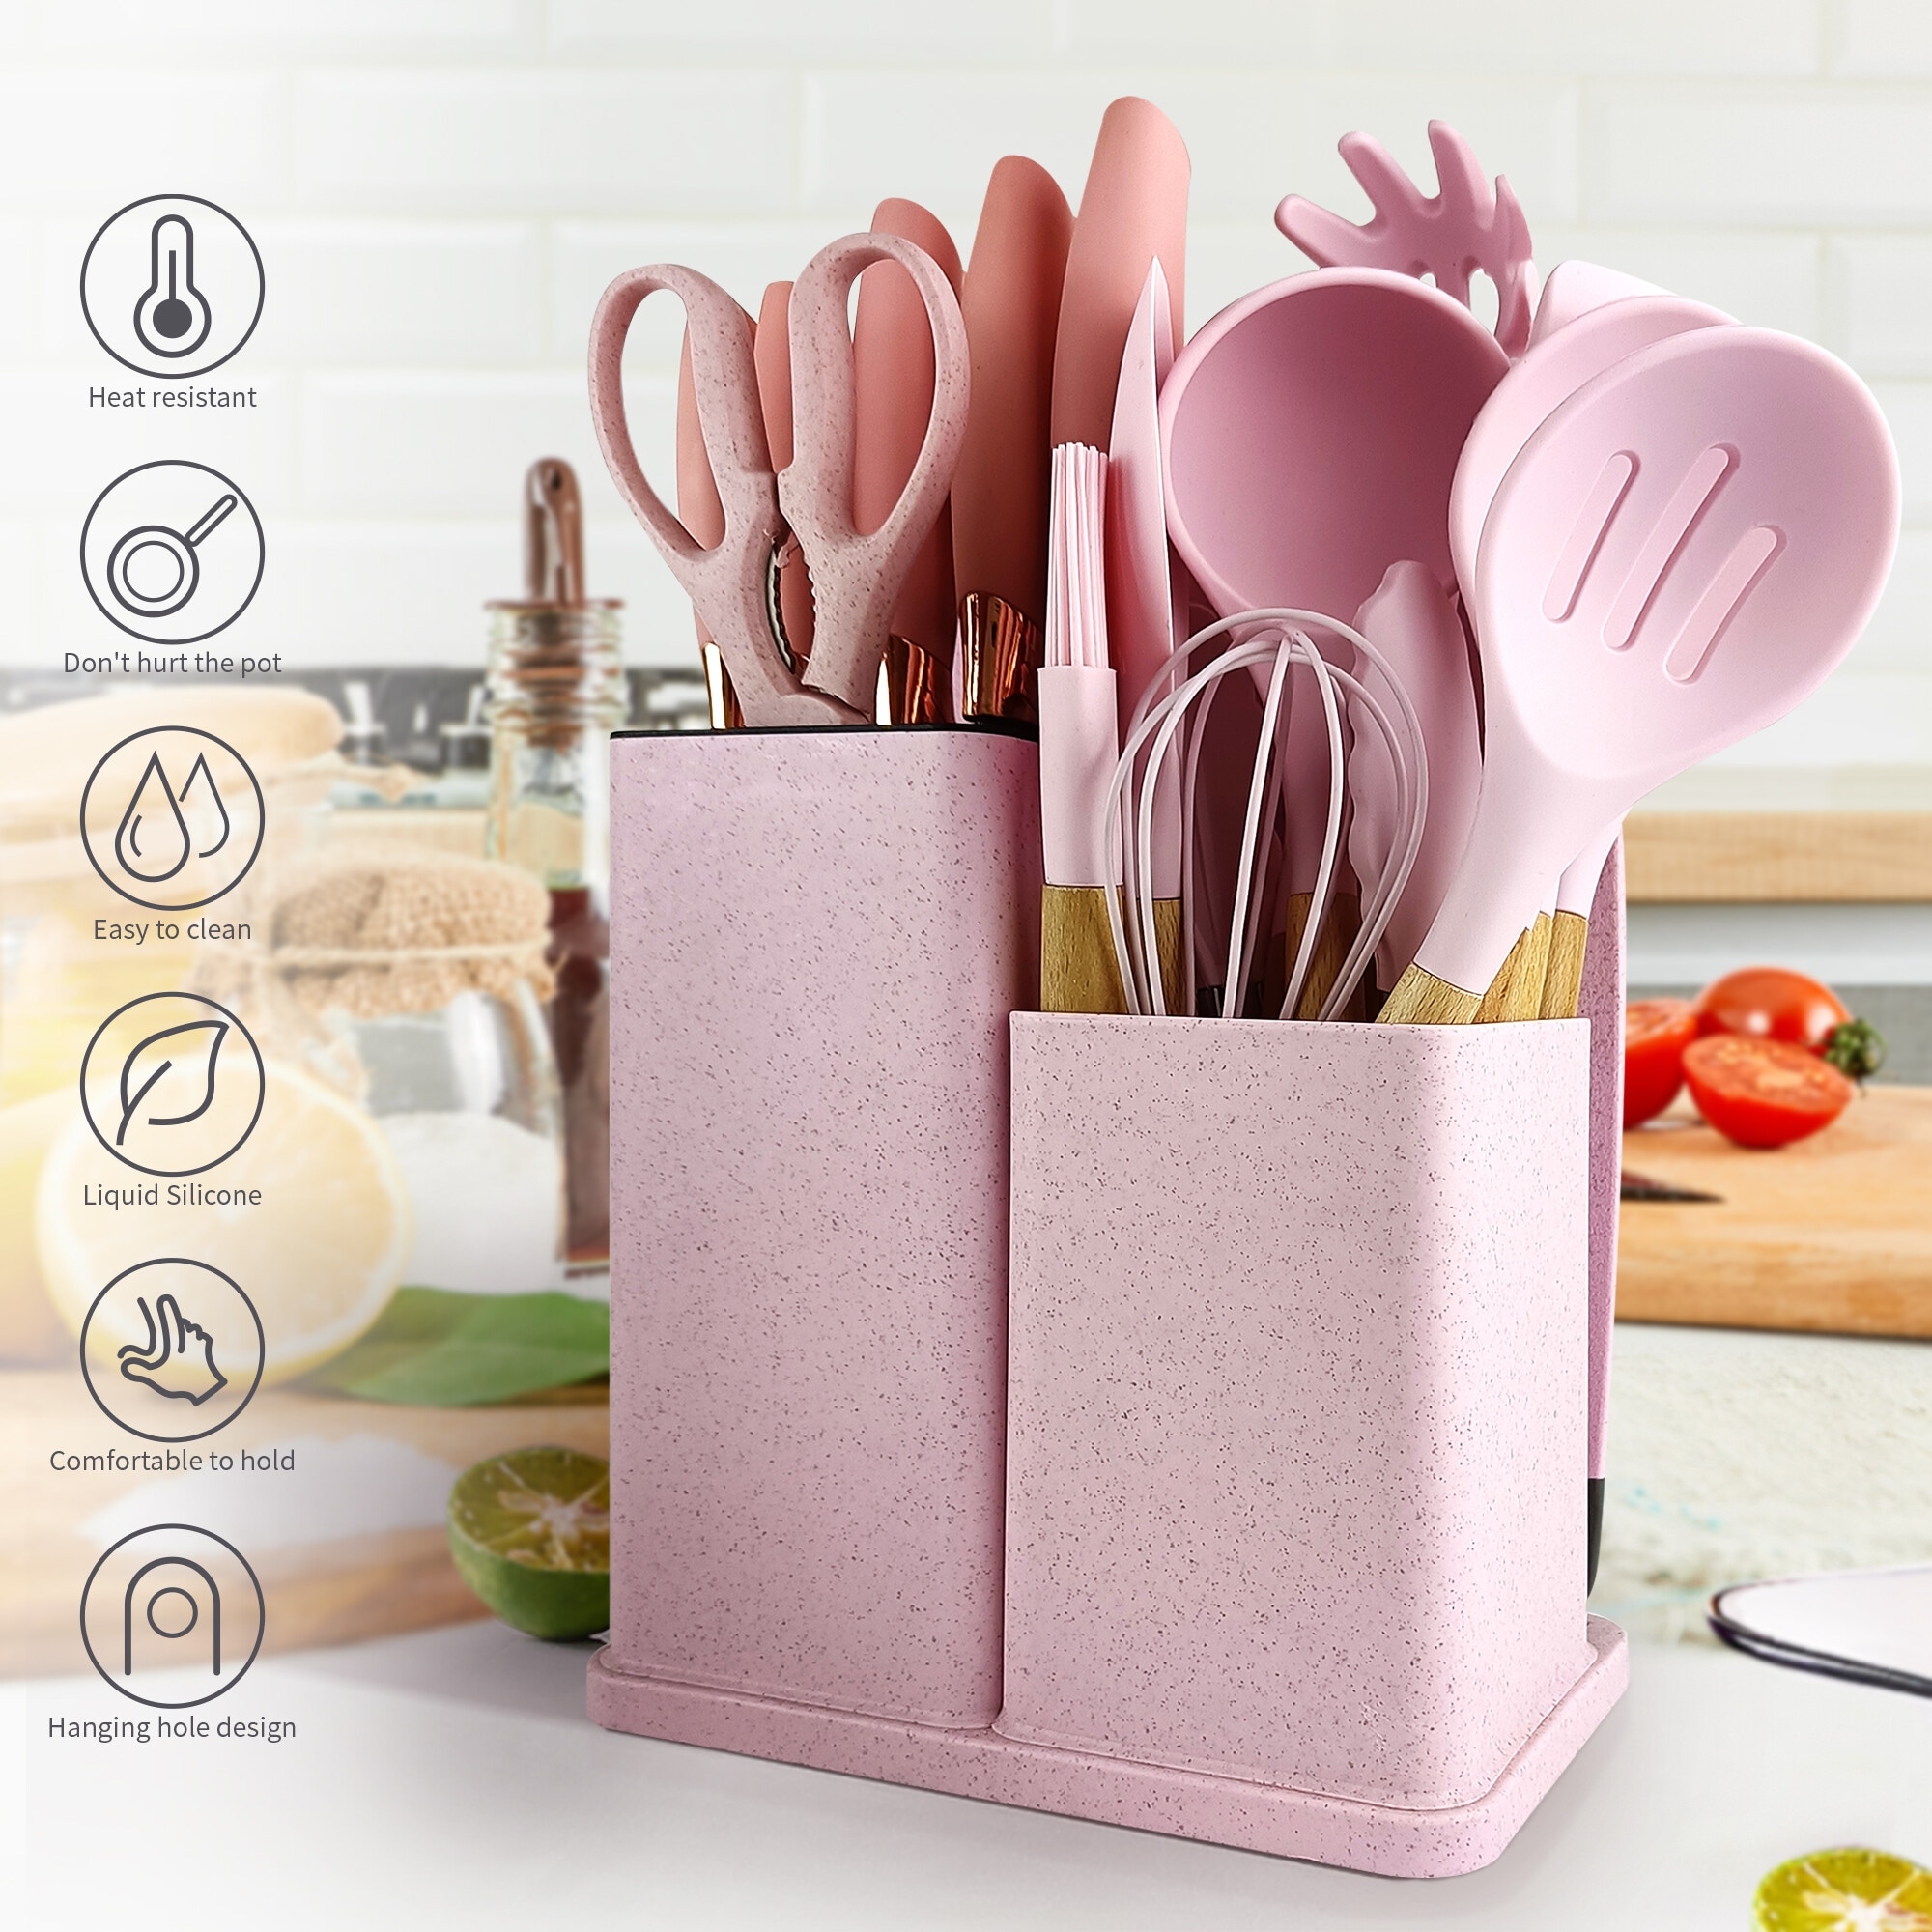 https://ak1.ostkcdn.com/images/products/is/images/direct/59e25d55c84c9fb8ee49b0f3810310af236702f5/19-piece-Non-stick-Silicone-Assorted-Kitchen-Utensil-Set.jpg